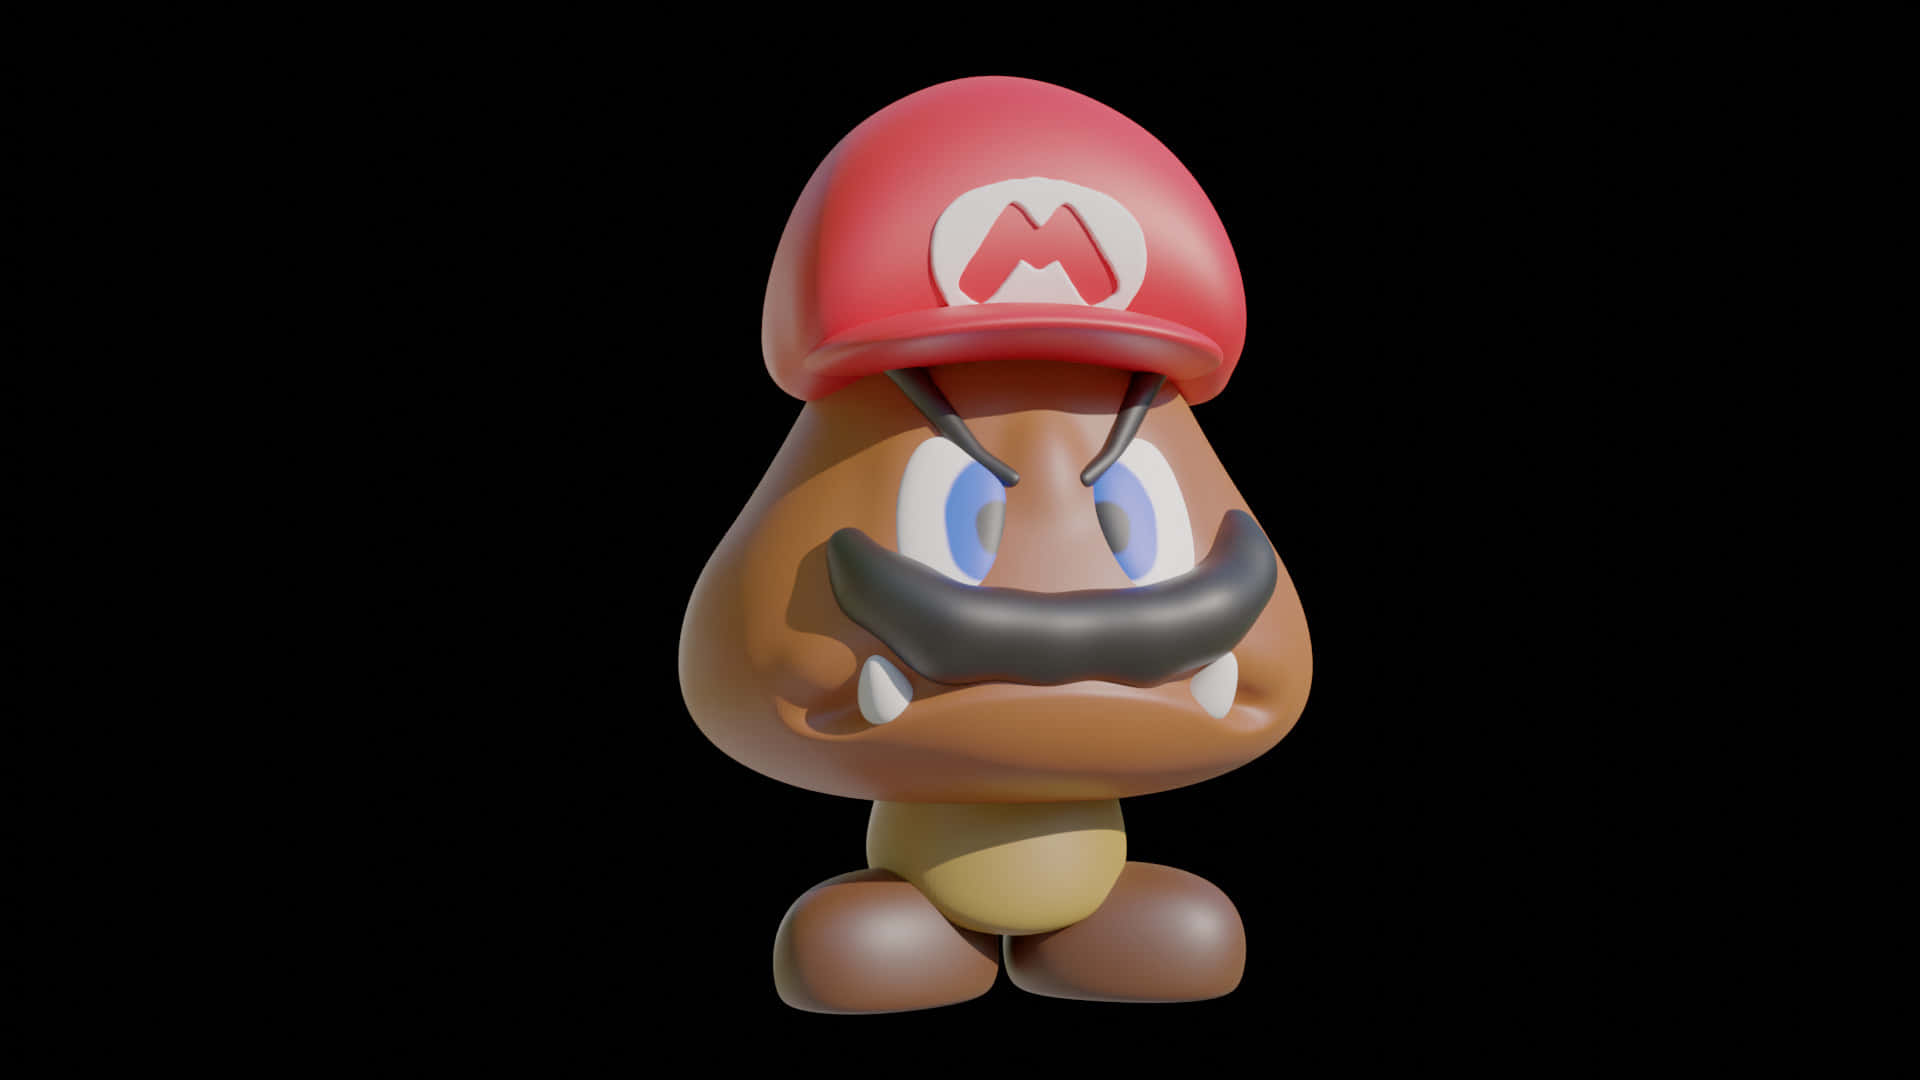 Goomba character strolling in the world of Super Mario Bros. Wallpaper